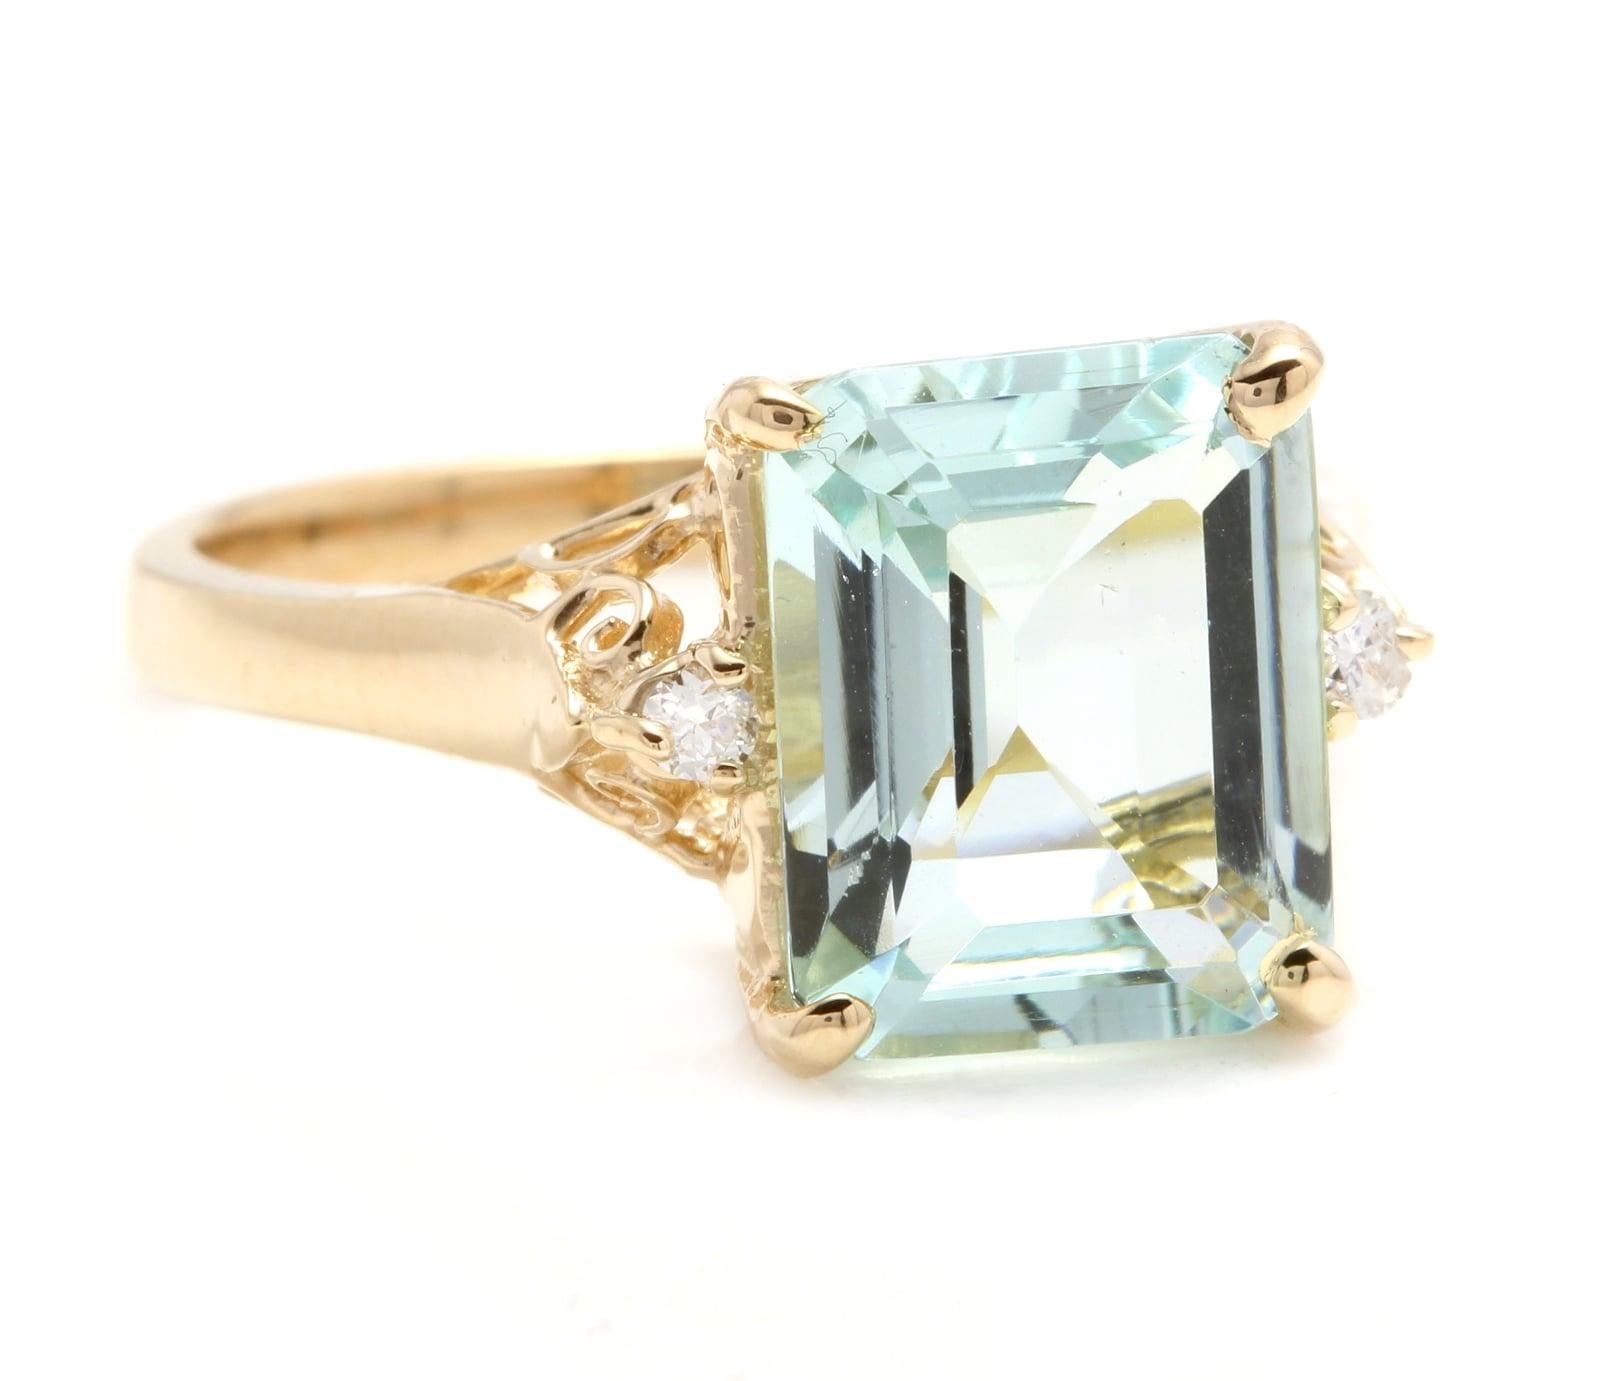 3.58 Carats Impressive Natural Aquamarine and Diamond 14K Yellow Gold Ring

Suggested Replacement Value: Approx. $3,000.00

Total Natural Aquamarine Weight is: Approx. 3.50 Carats 

Aquamarine Measures: Approx. 11.00 x 9.00mm

Natural Round Diamonds